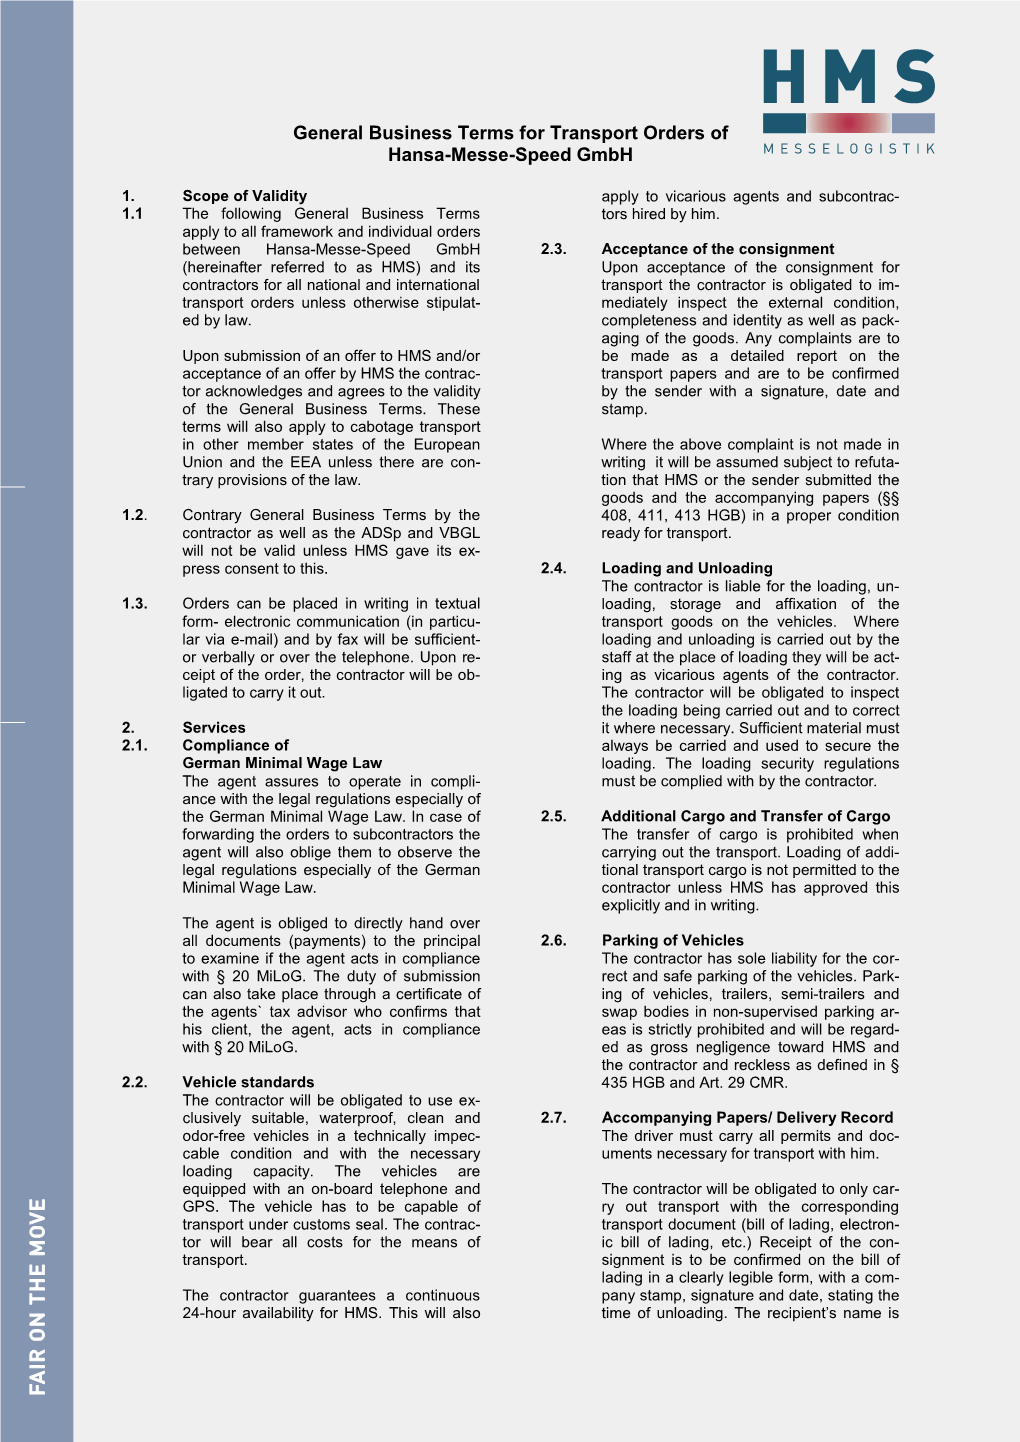 General Business Terms for Transport Orders of Hansa-Messe-Speed Gmbh